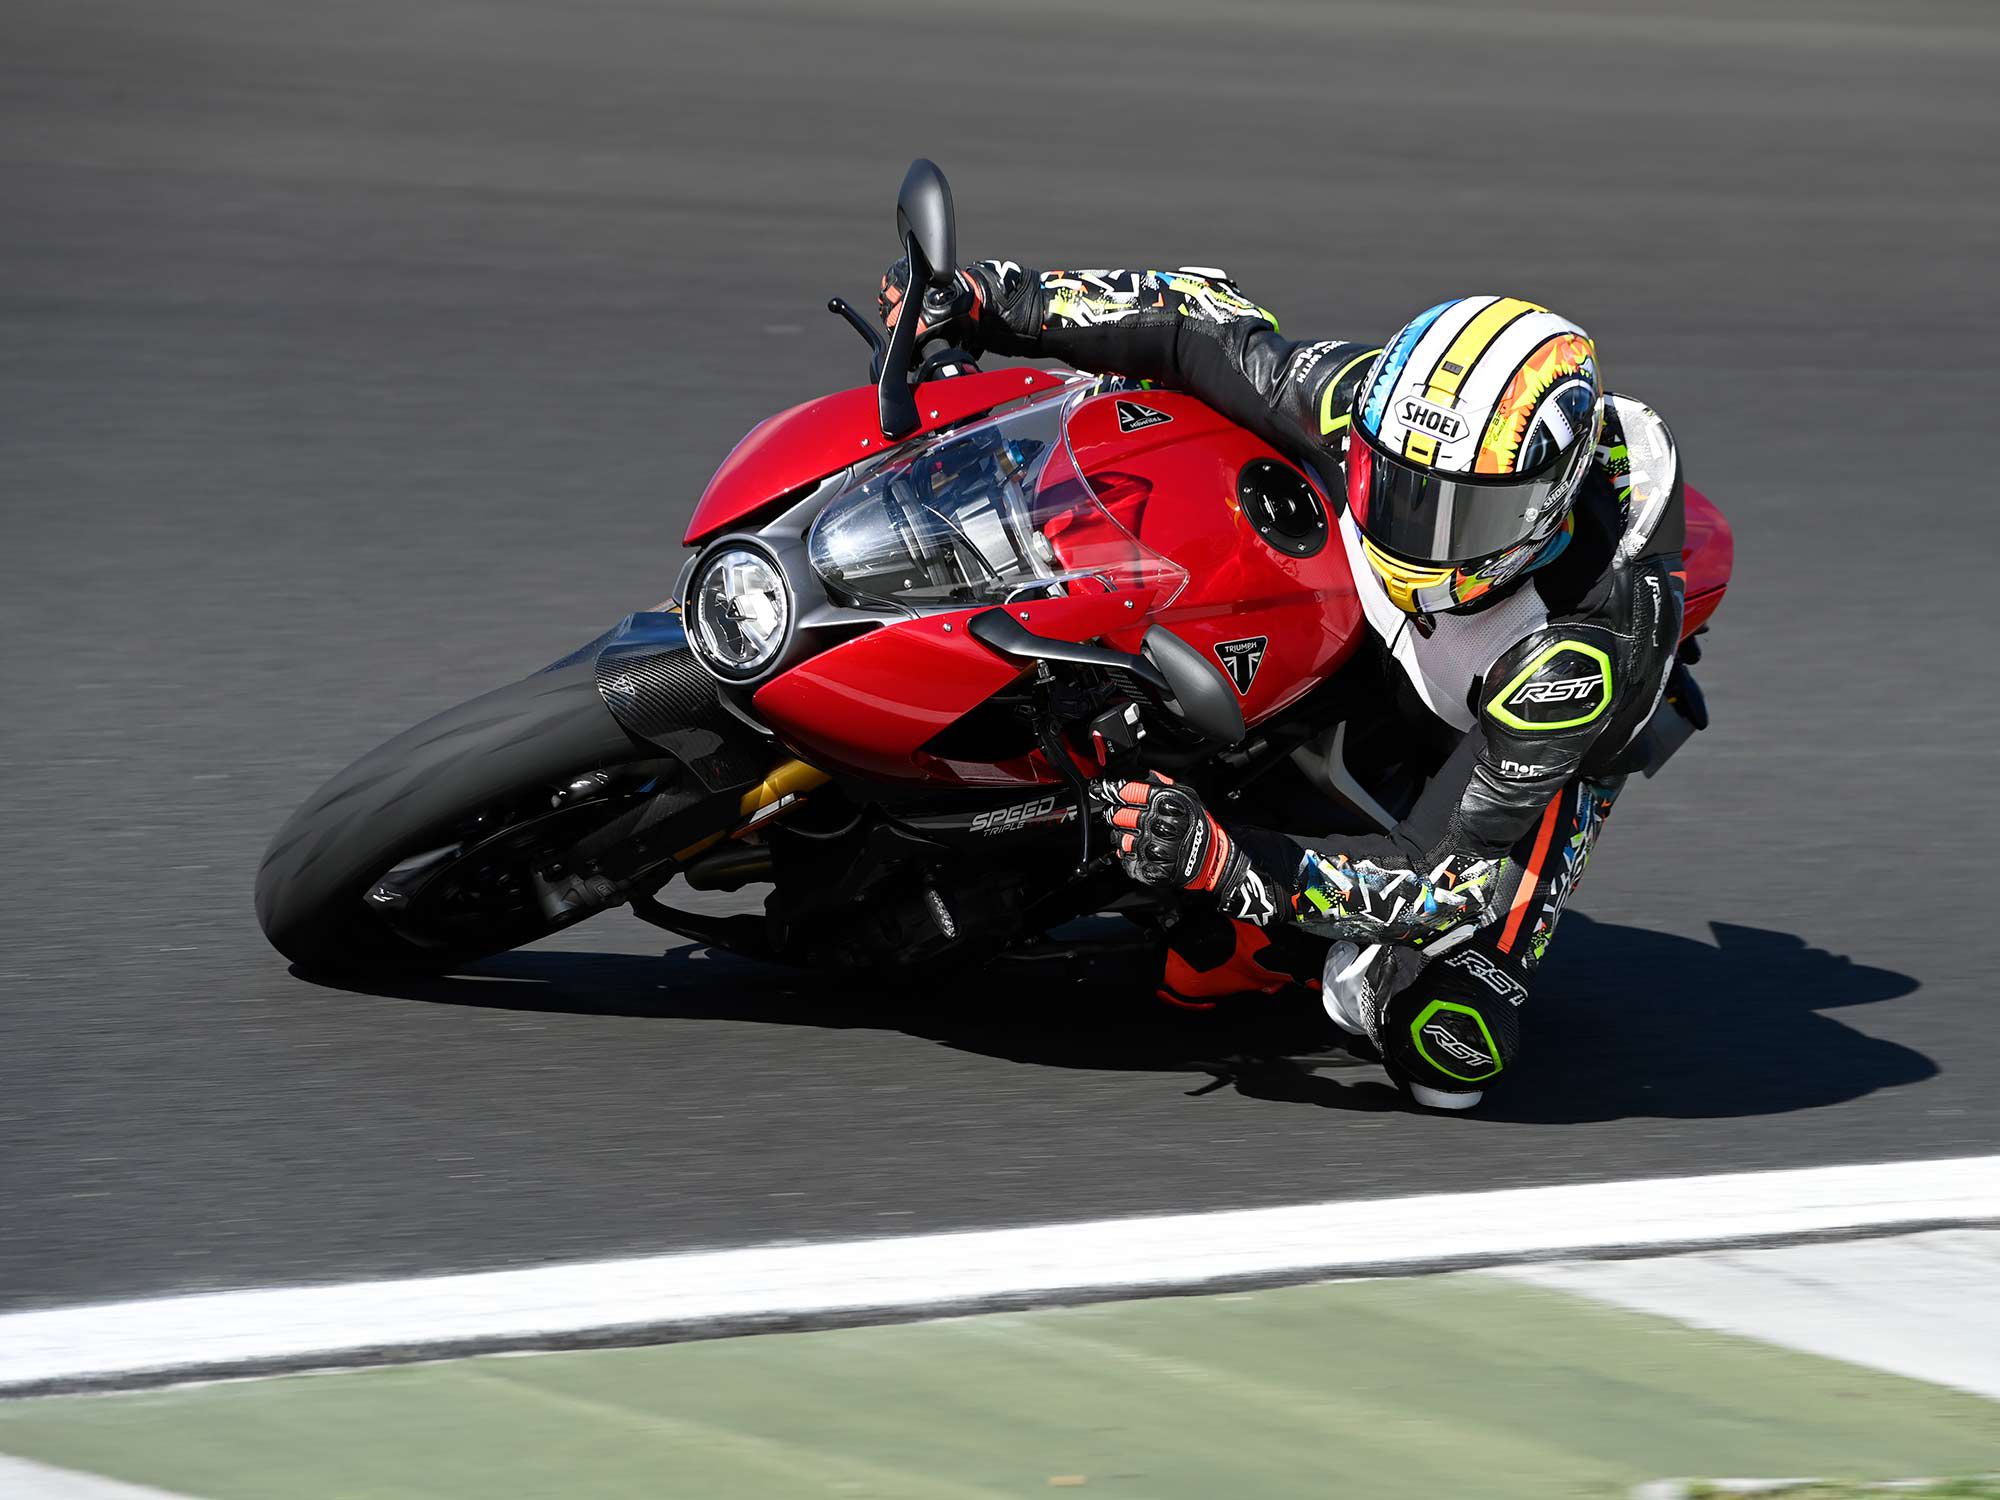 Its torque output puts most 200 hp-plus sportbikes to shame, and even out-grunts the new Ducati Panigale V4.